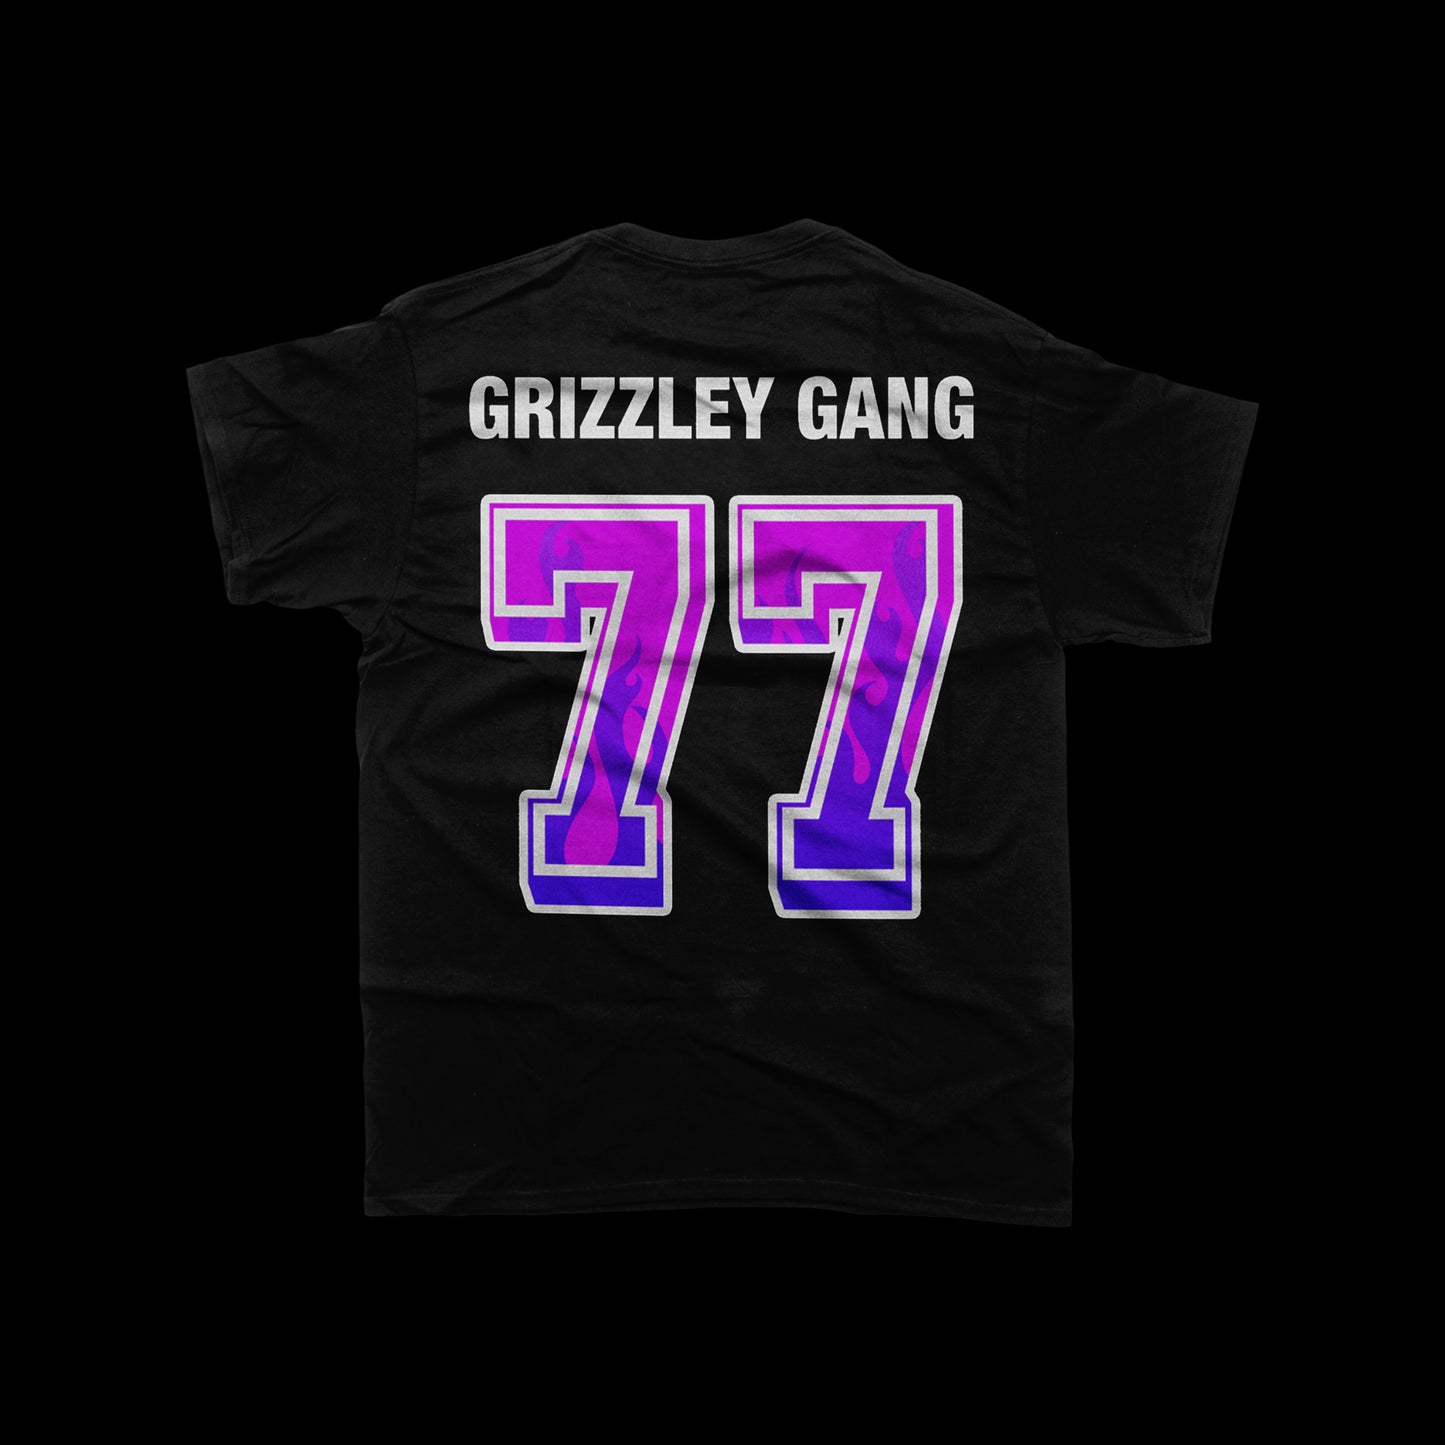 Grizzley 77 Purple Flame Tee